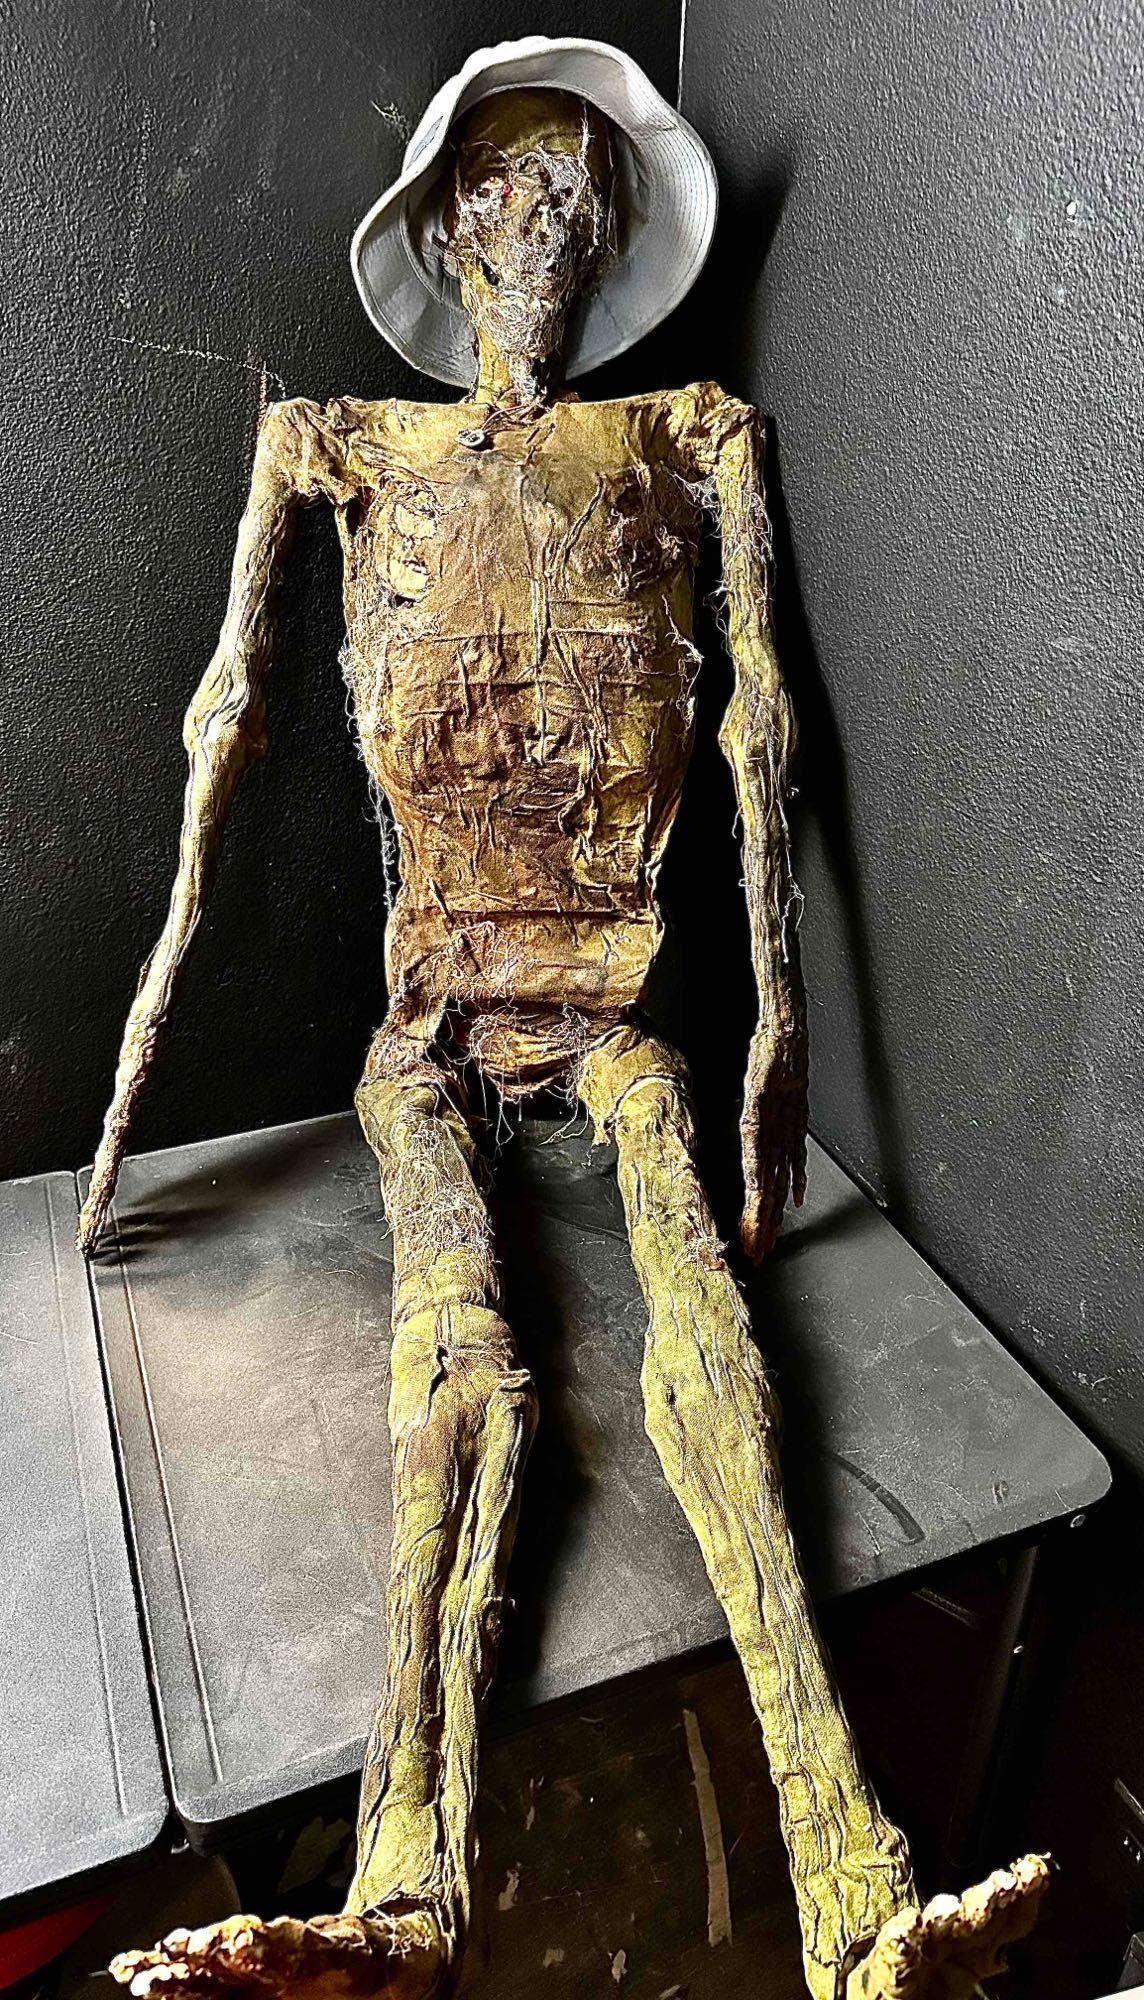 Life Size Realistic Rotting Human Corpse Prop. For Halloween, Film, more